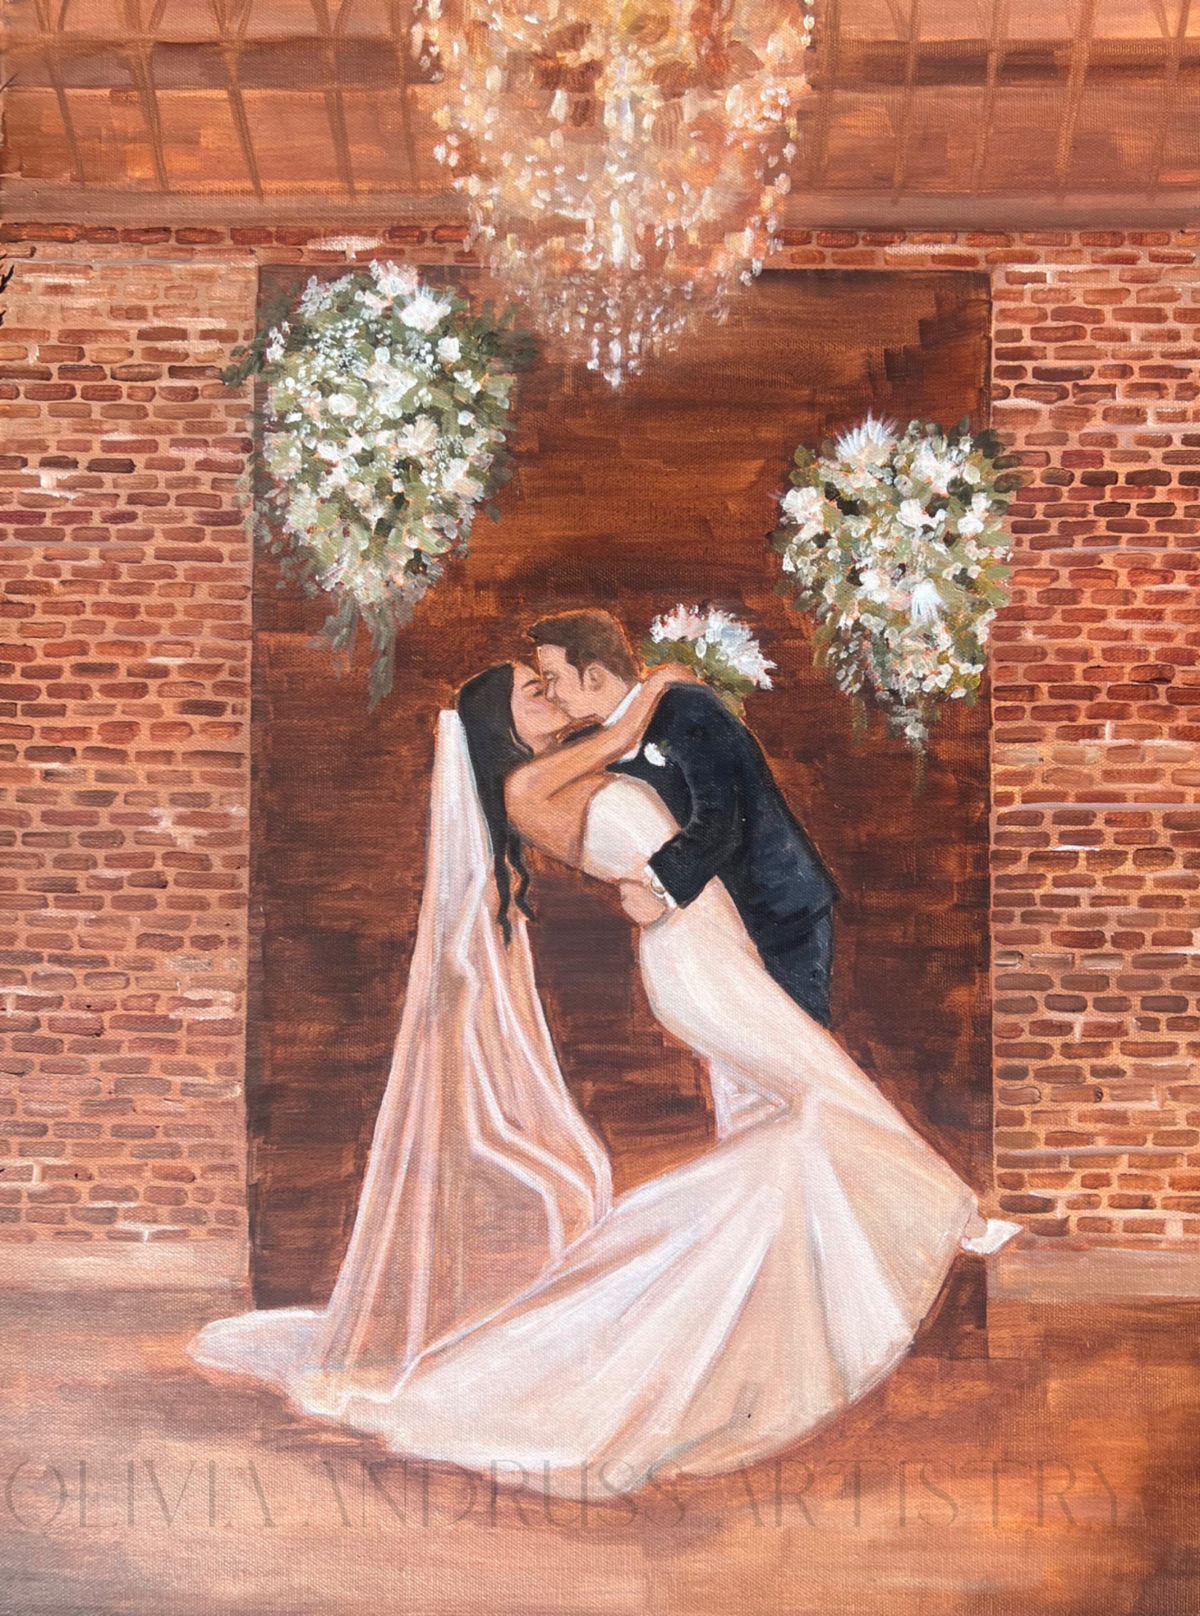 Live Wedding Painting by Olivia Andruss depicts a newly husband and wife kissing at the altar after their vows at the St. Vrain in Longmont, Colorado